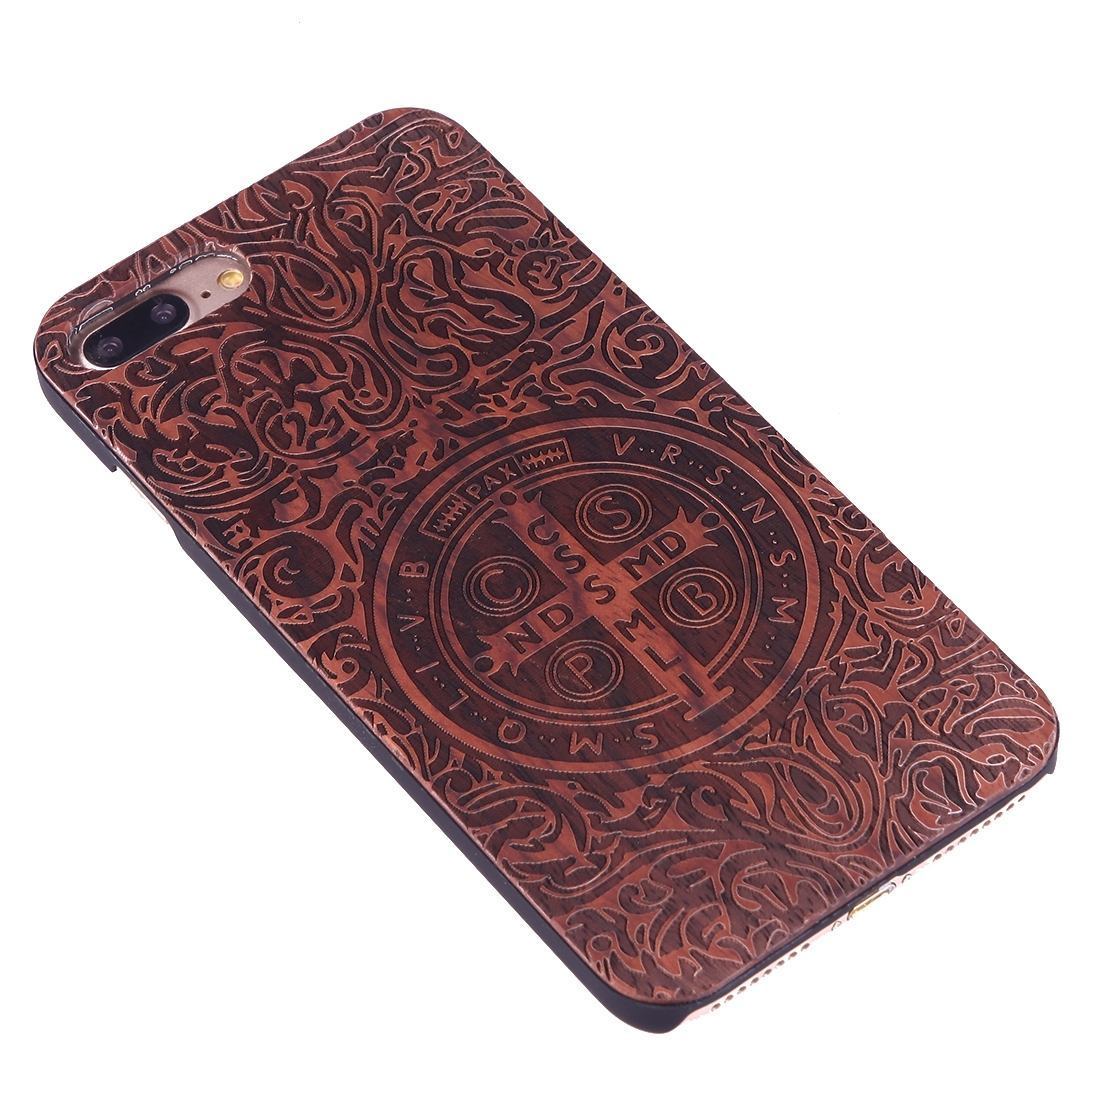 For iPhone 8 PLUS,7 PLUS Case,Rosewood Benedictine Cross Wooden Protective Cover